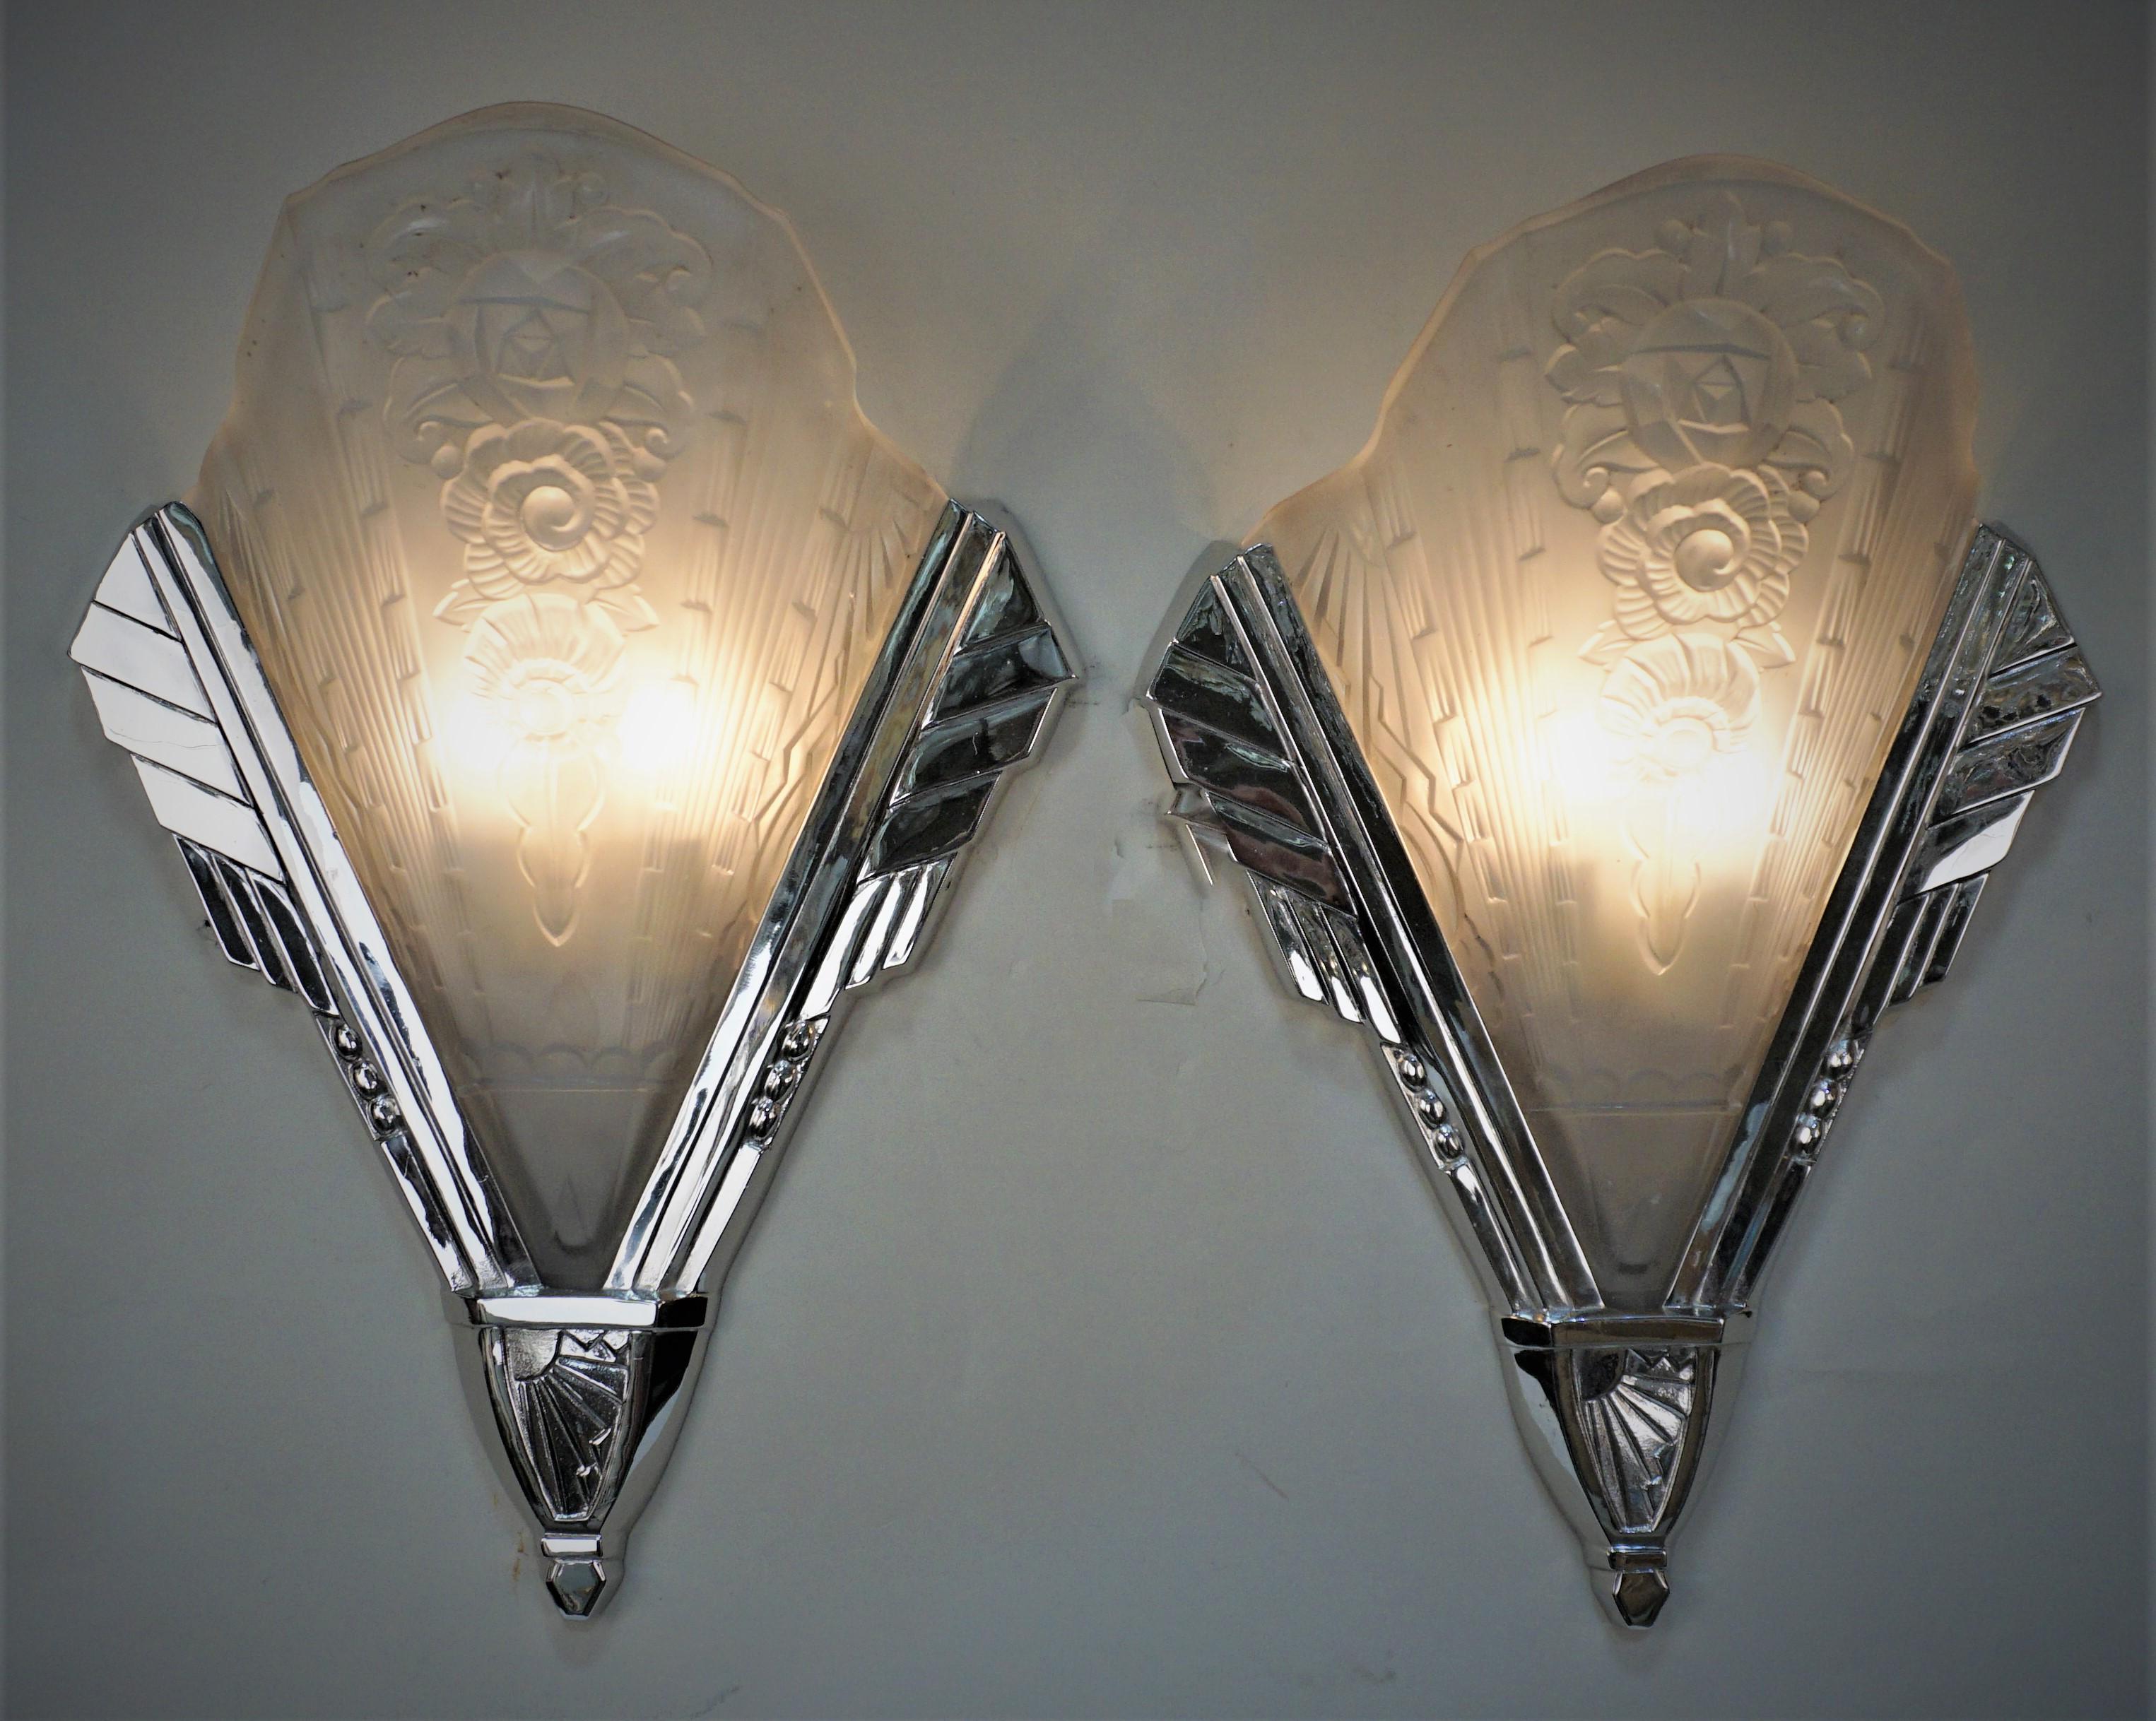 Hettier & Vincent Large Art Deco Wall Sconces 2 Pairs In Good Condition For Sale In Fairfax, VA